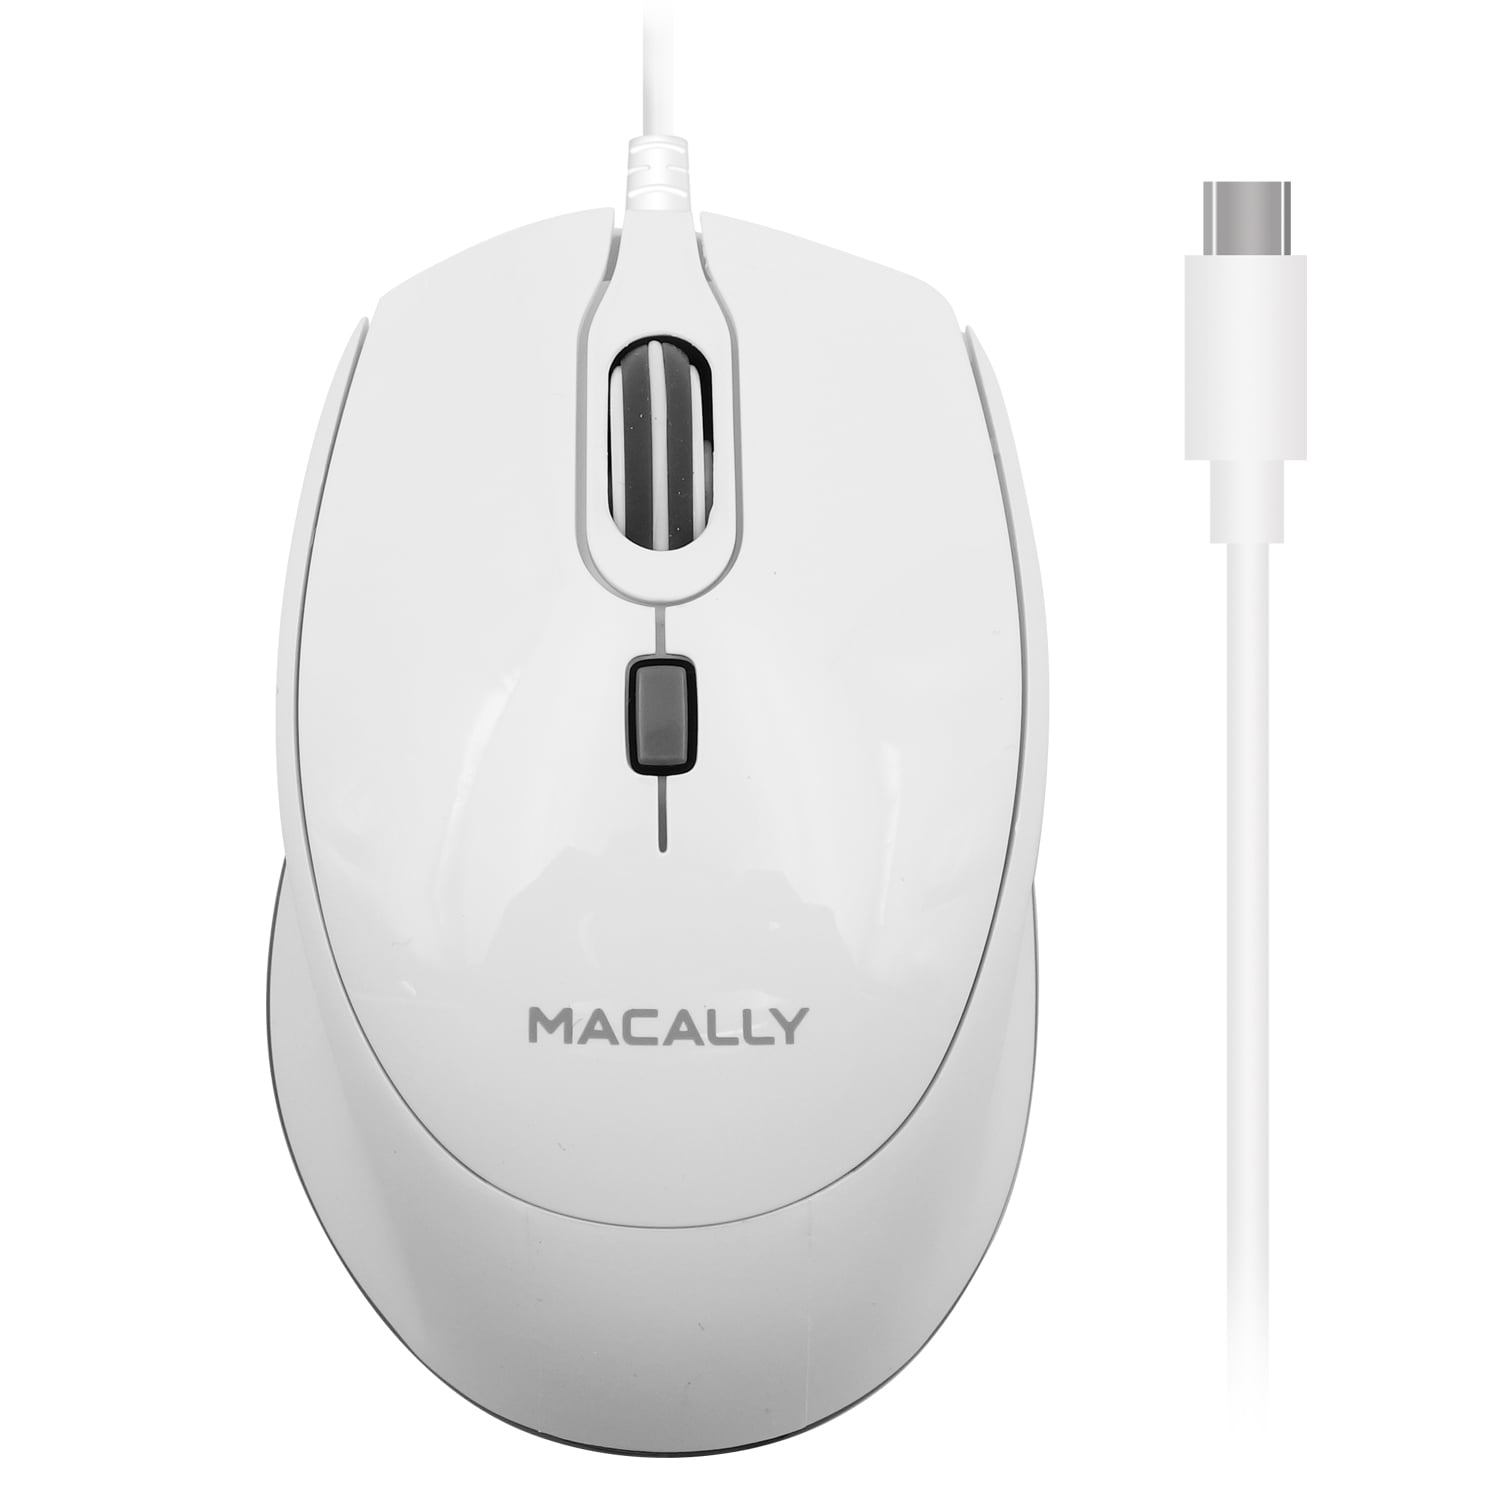 Macally Macally Usb C Mouse For Precise and Comfortable- Wired Type C Mouse For Macbook Pro Air pc ios android- Ambidextrous Body, Multiple Dpi and 5ft Cable- Plug and Play